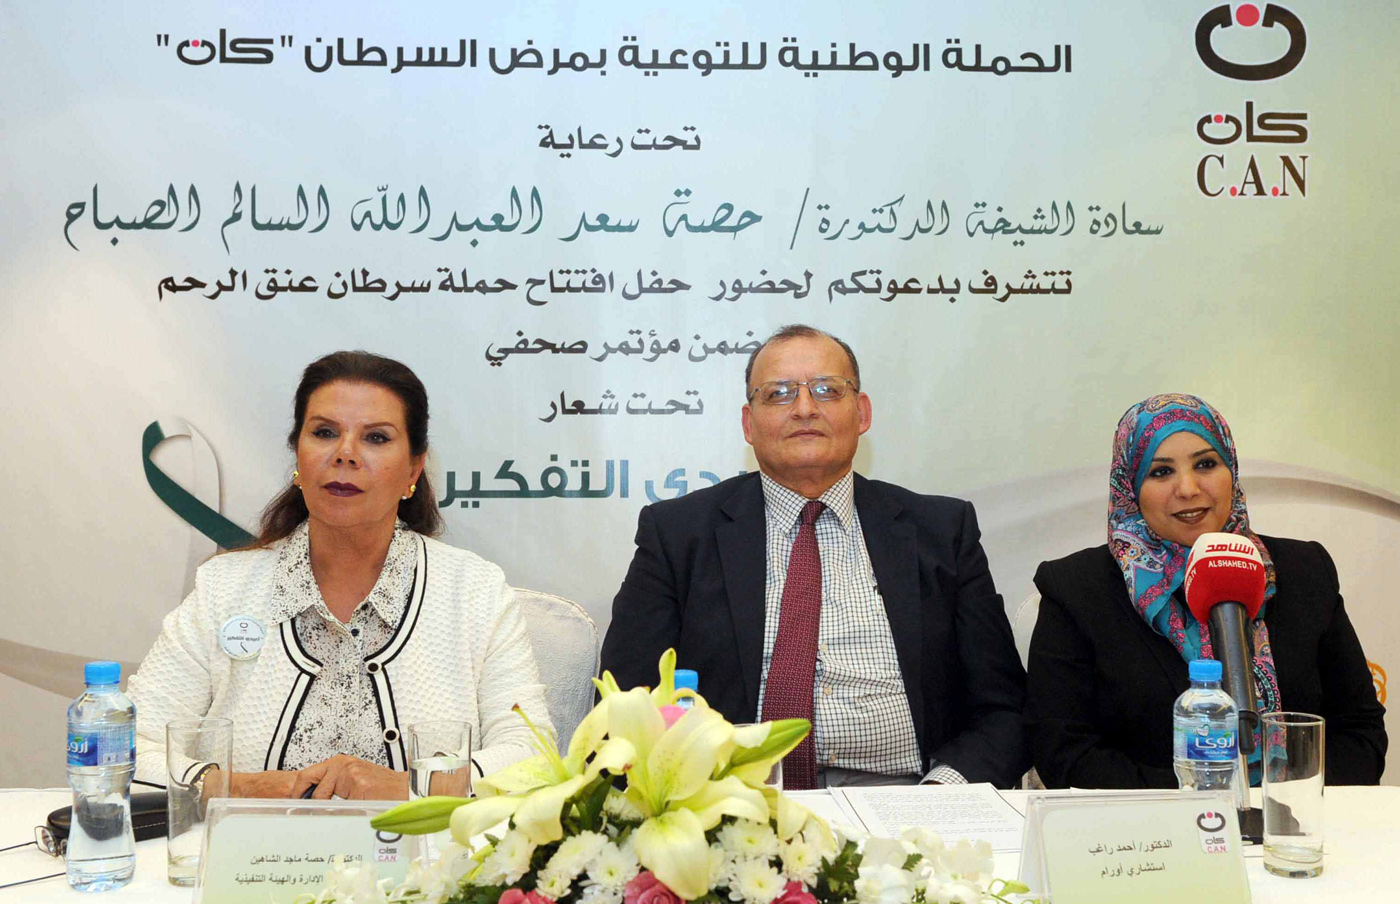 CAN board member Dr. Hessa Al-Shaheen in a press conference